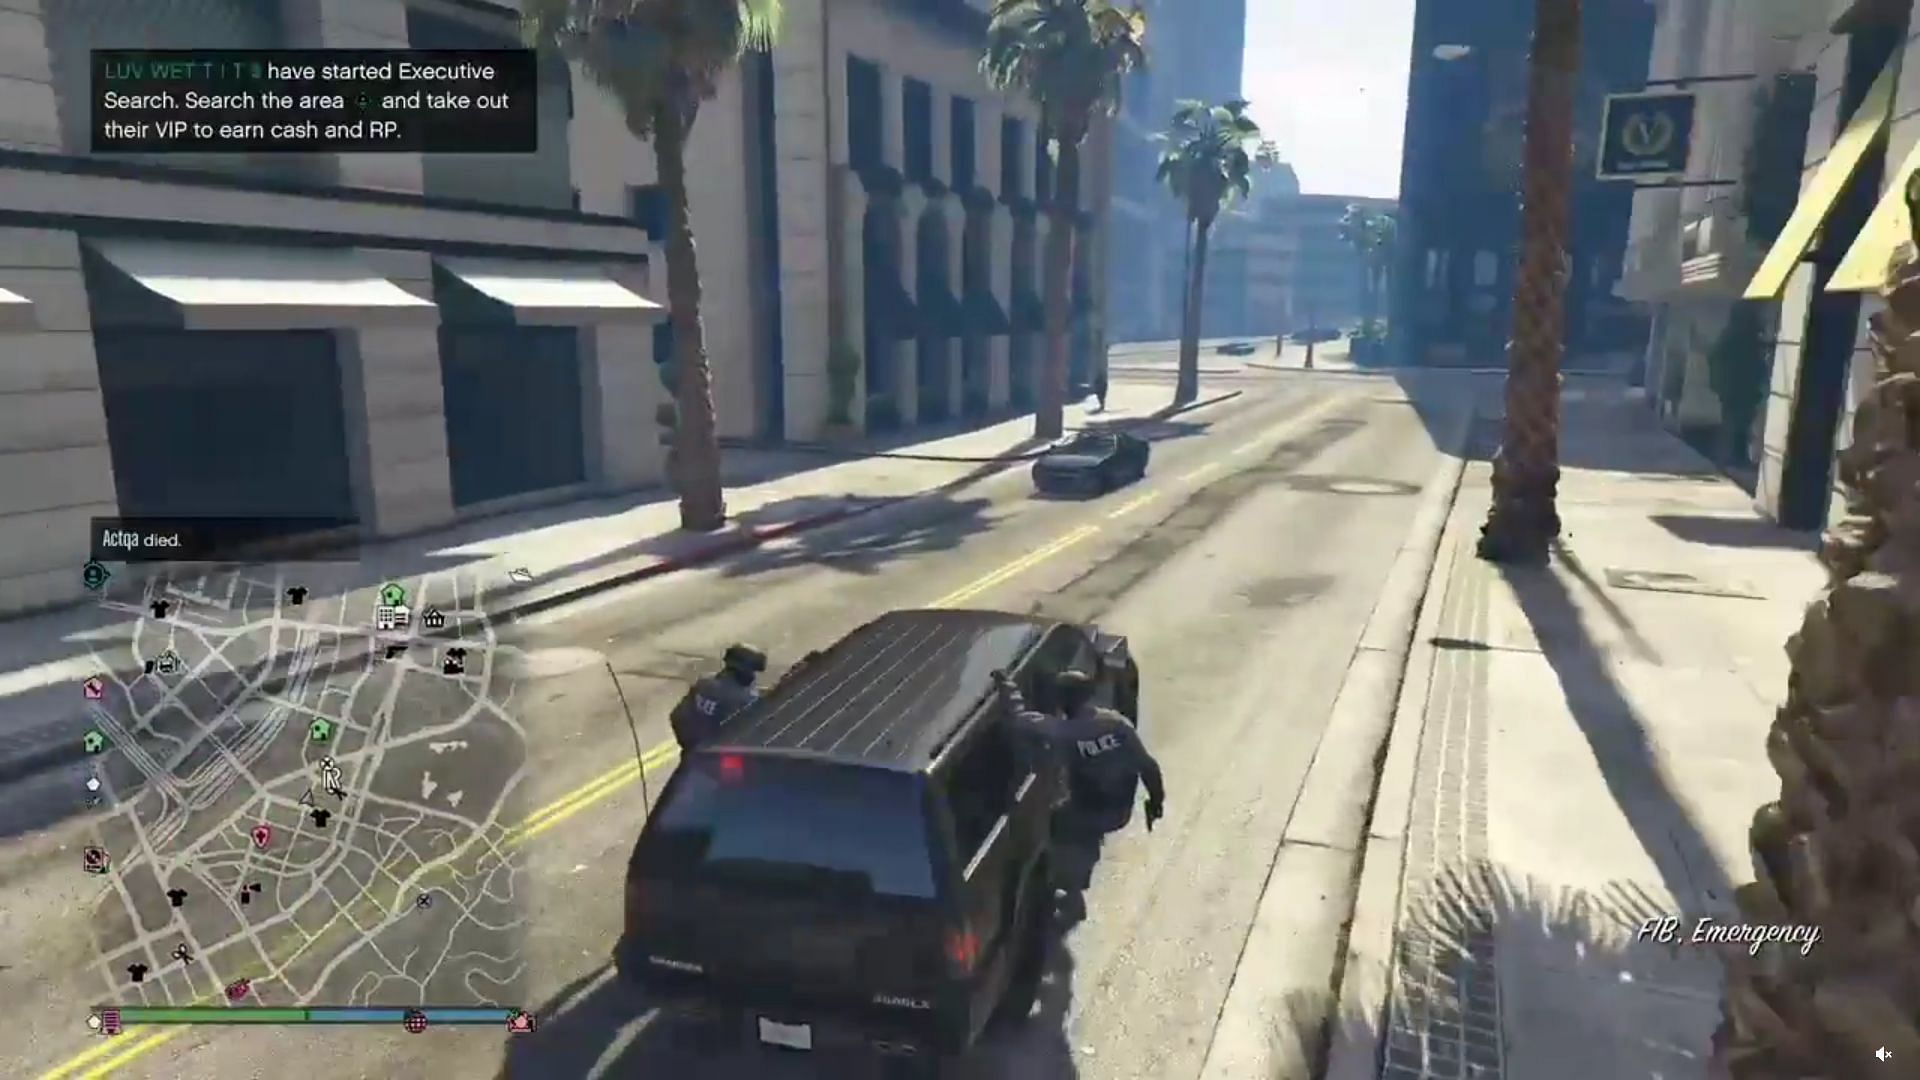 Bellzalito gets onto an LSPD SUV and leaves with his buddies. (Image via Reddit/fuego_bellzalito62)